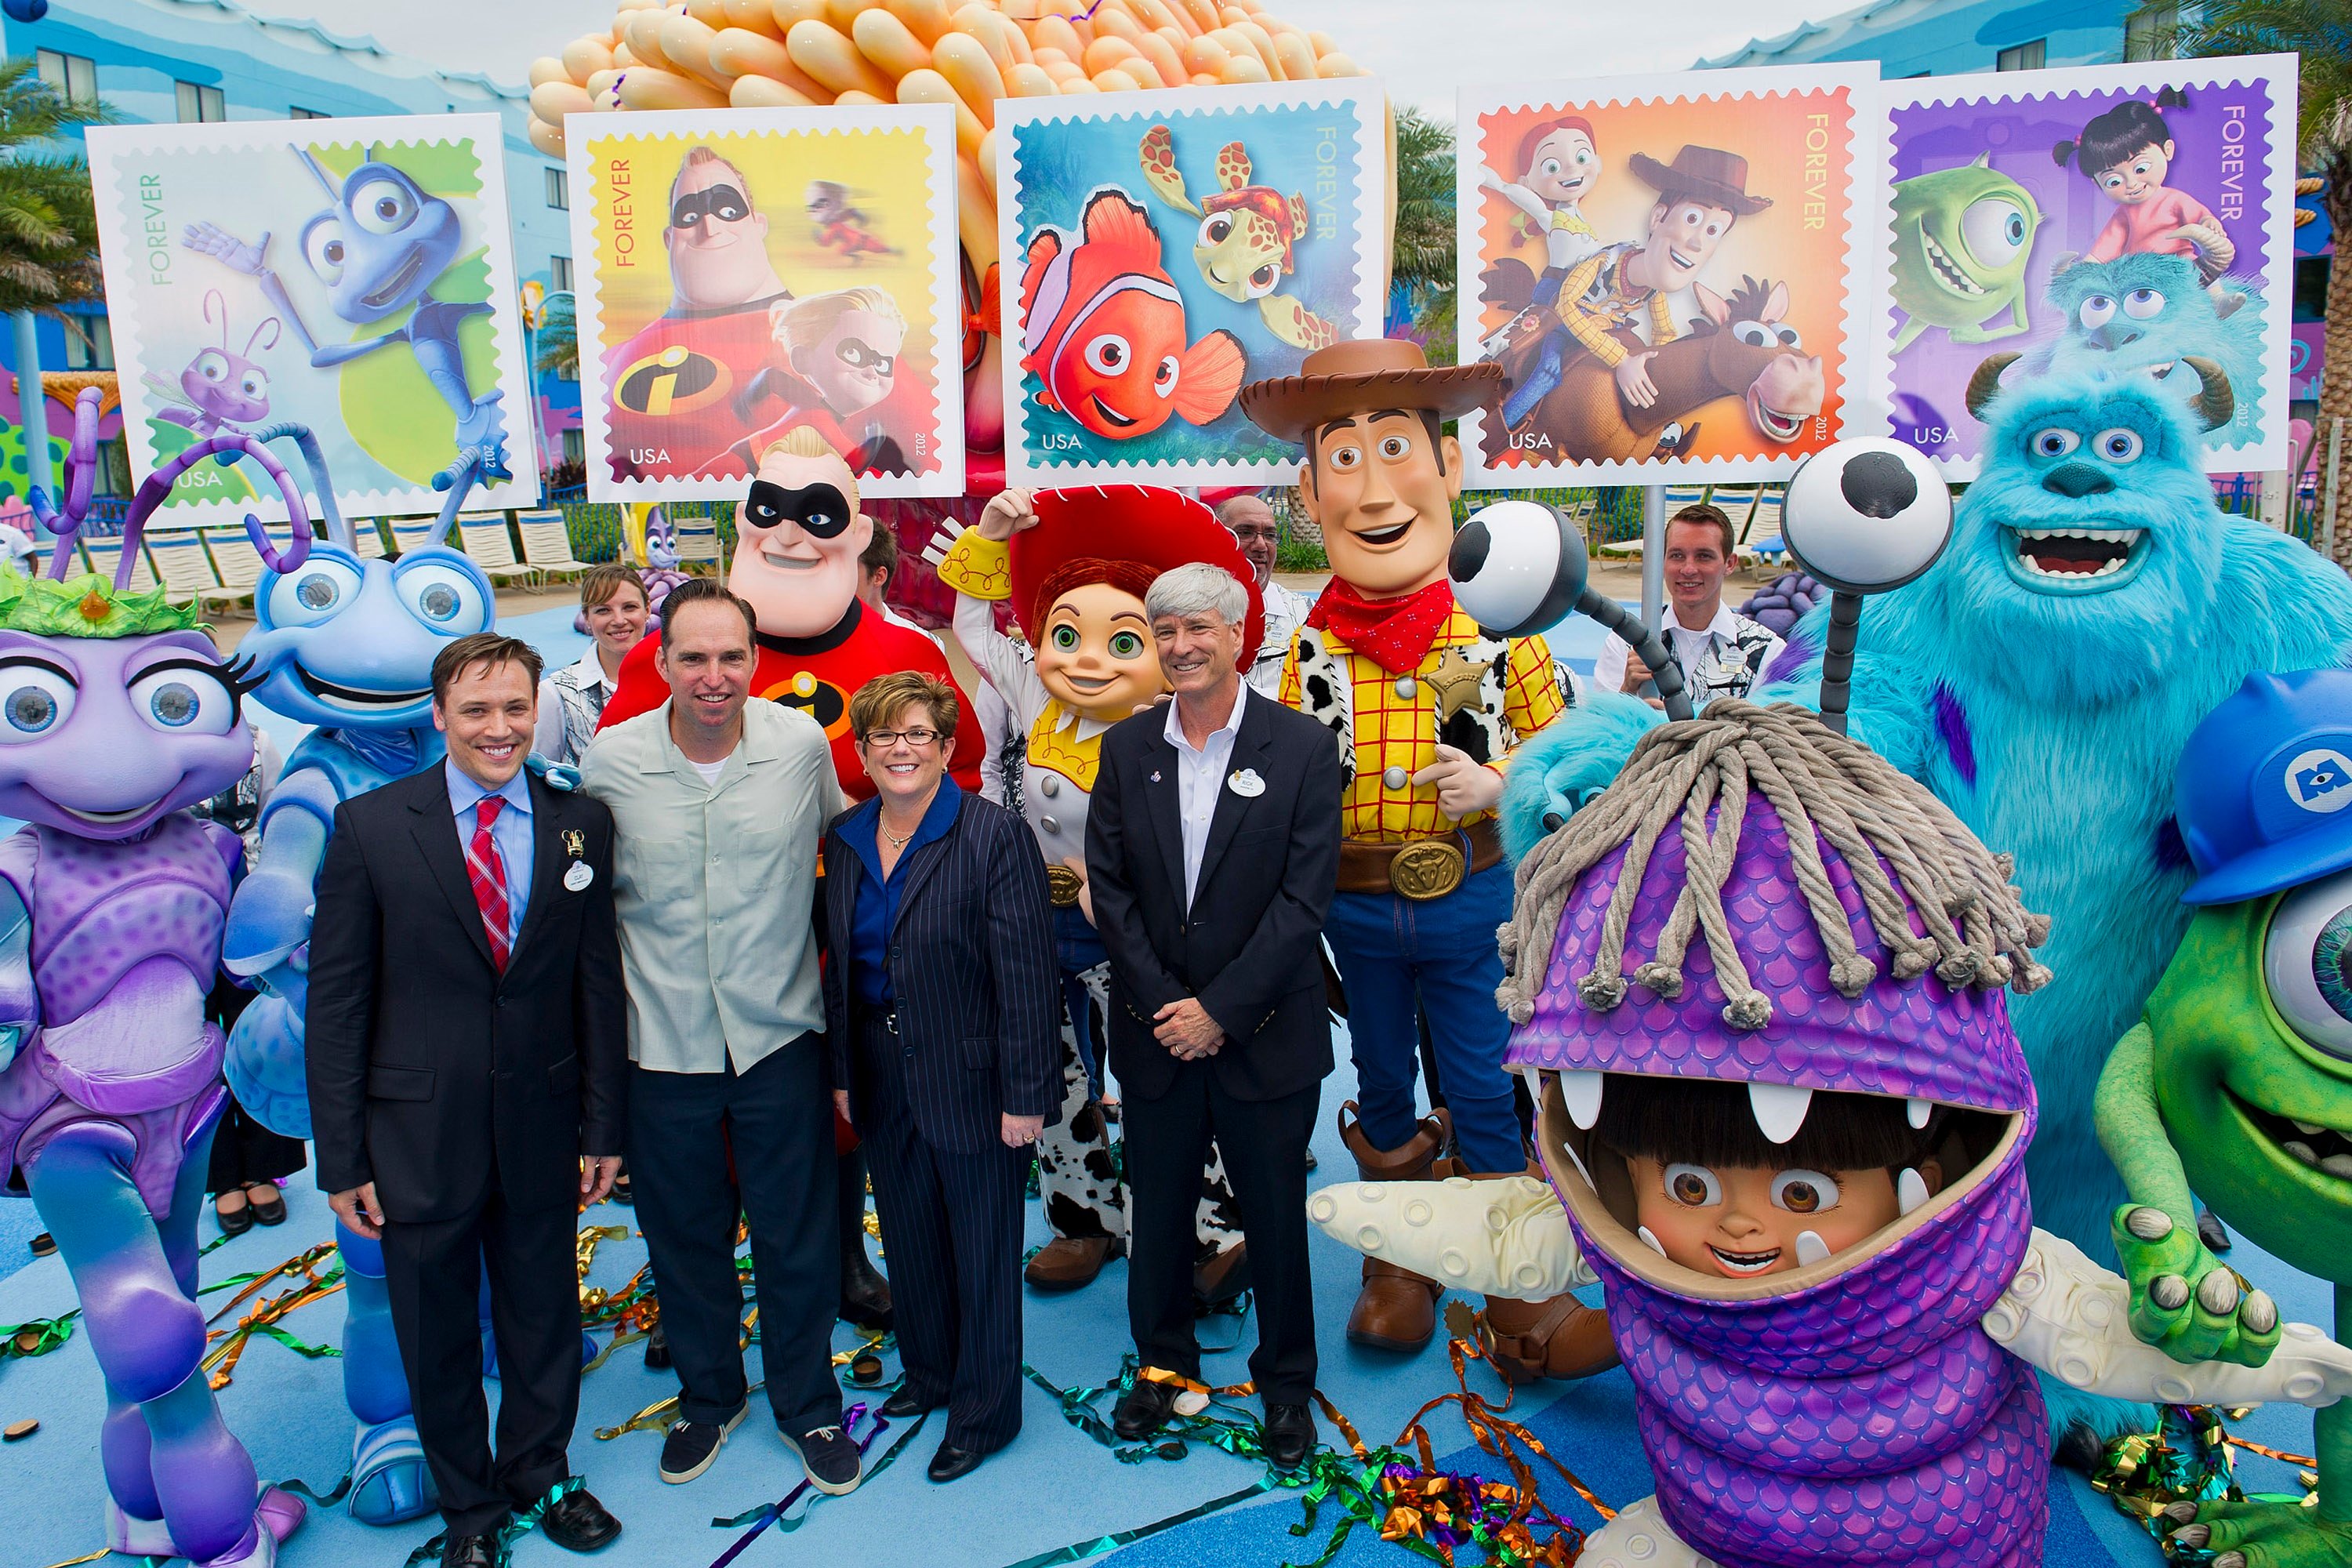 The postal service unveiling a new stamp series at Disneys Art of Animation with characters from Monsters Inc including Boo, Sulley, and Mike along with characters from Finding Nemo, Toy Story, and The Incredibles